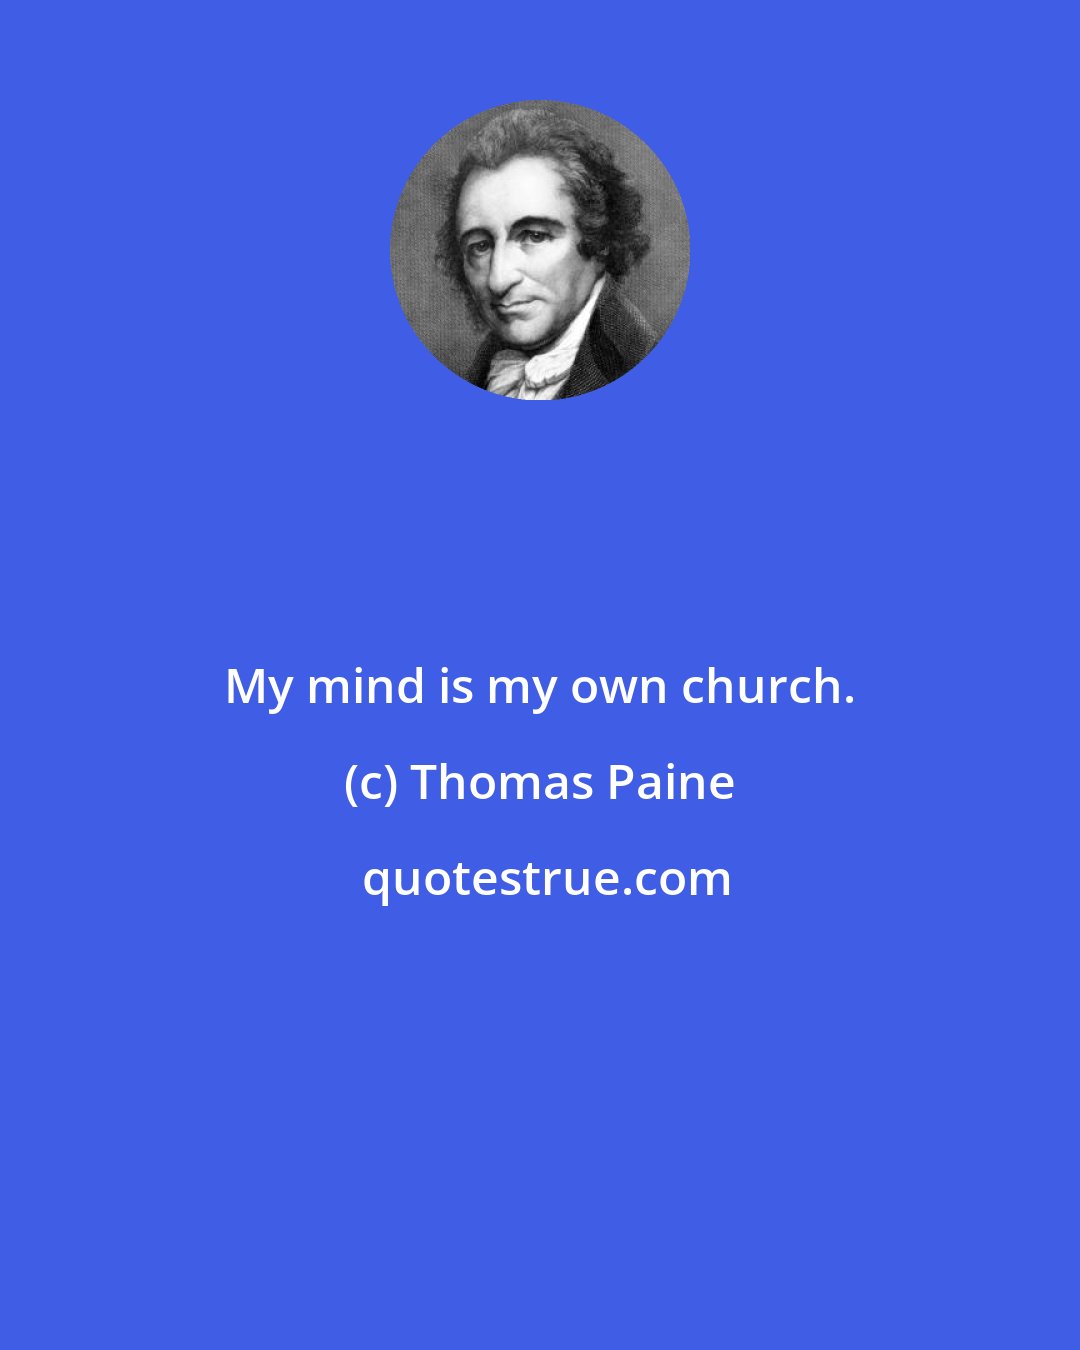 Thomas Paine: My mind is my own church.